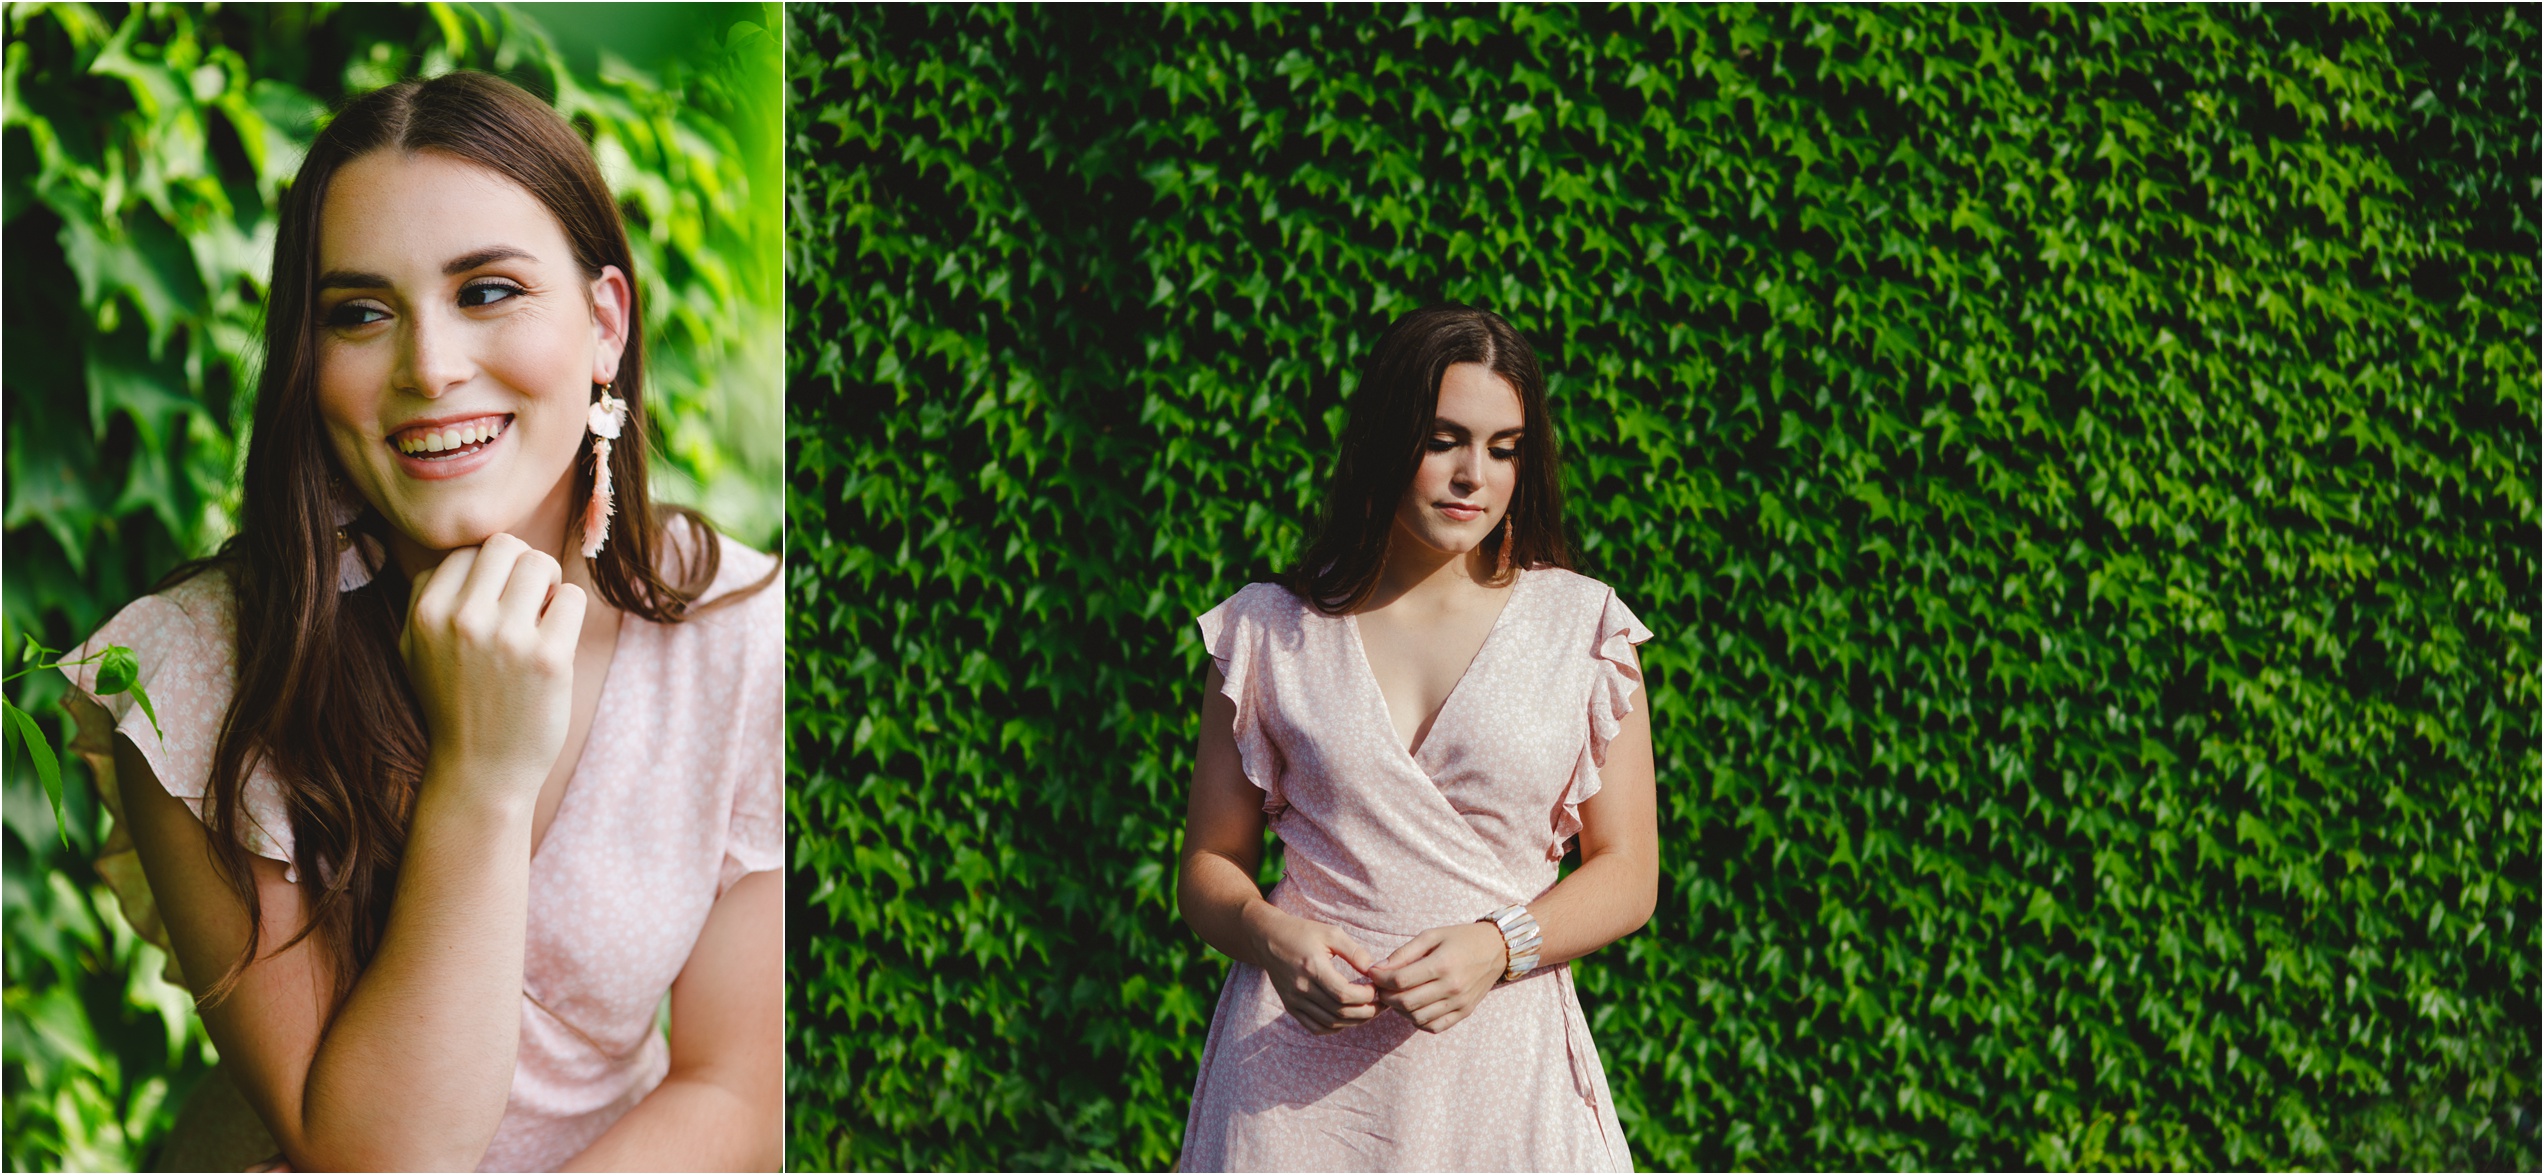 Kendall poses in front of a wall of foliage for her senior photo session in summer in Harrisburg Central PA.